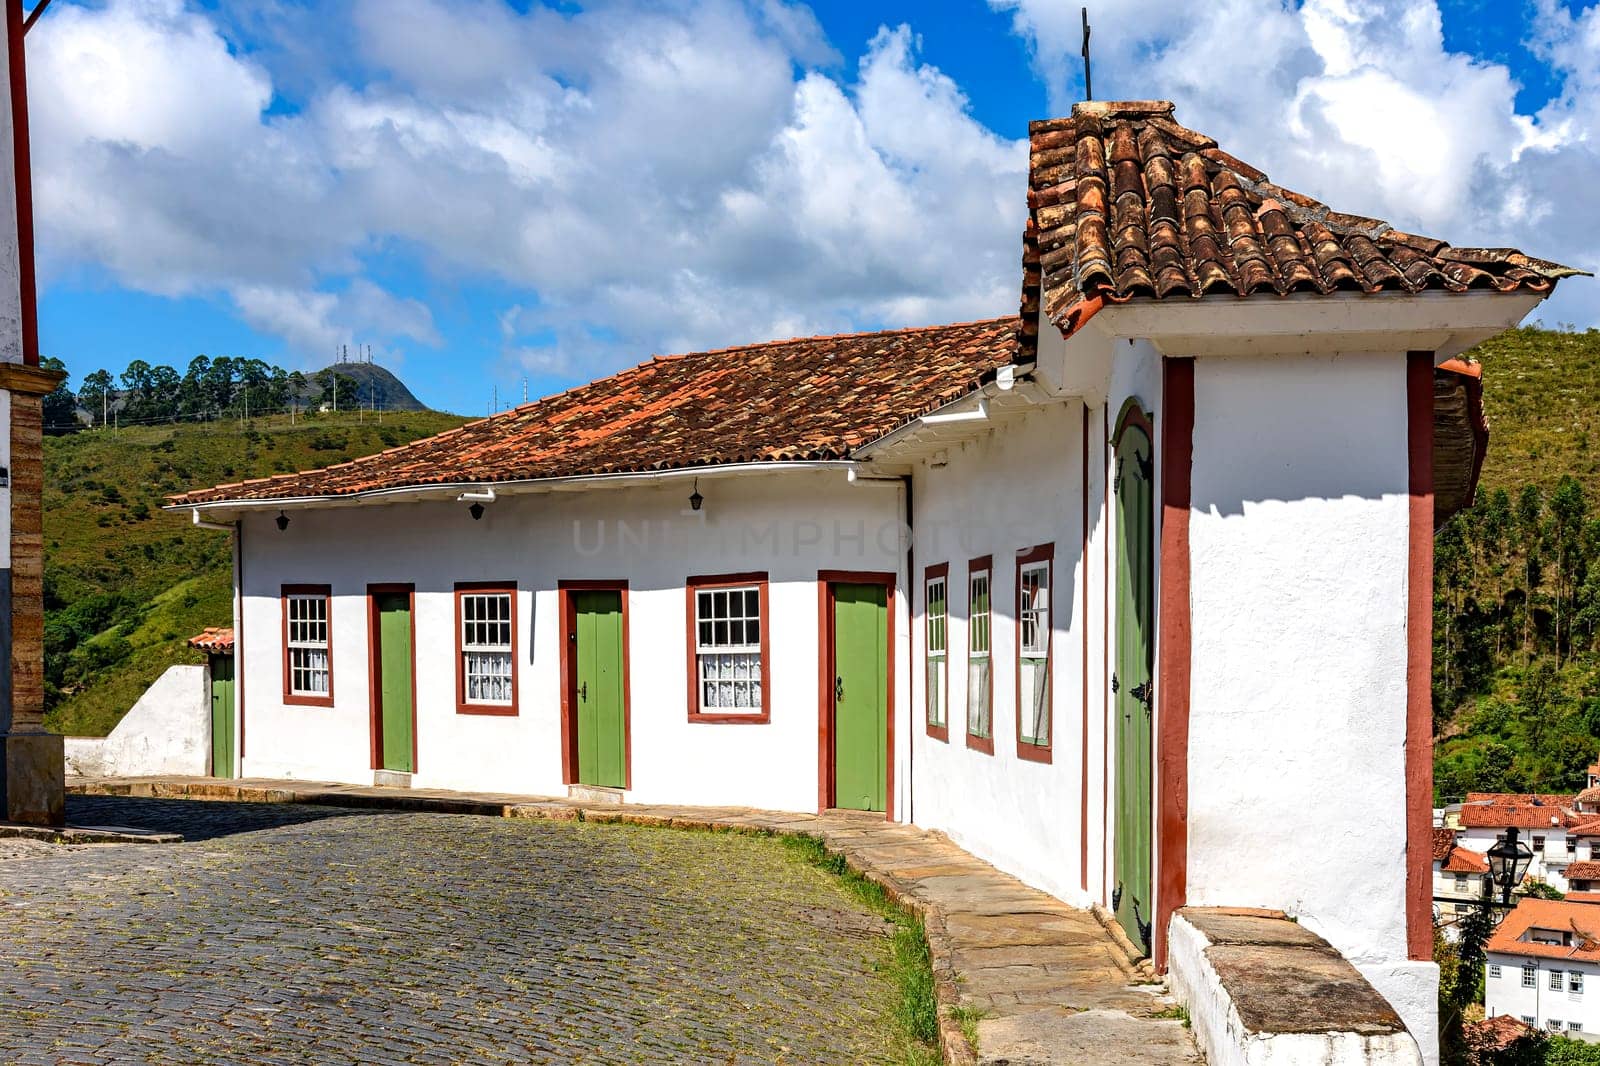 Cobblestone streets of Ouro Preto with old colonial-style houses in the state of Minas Gerais